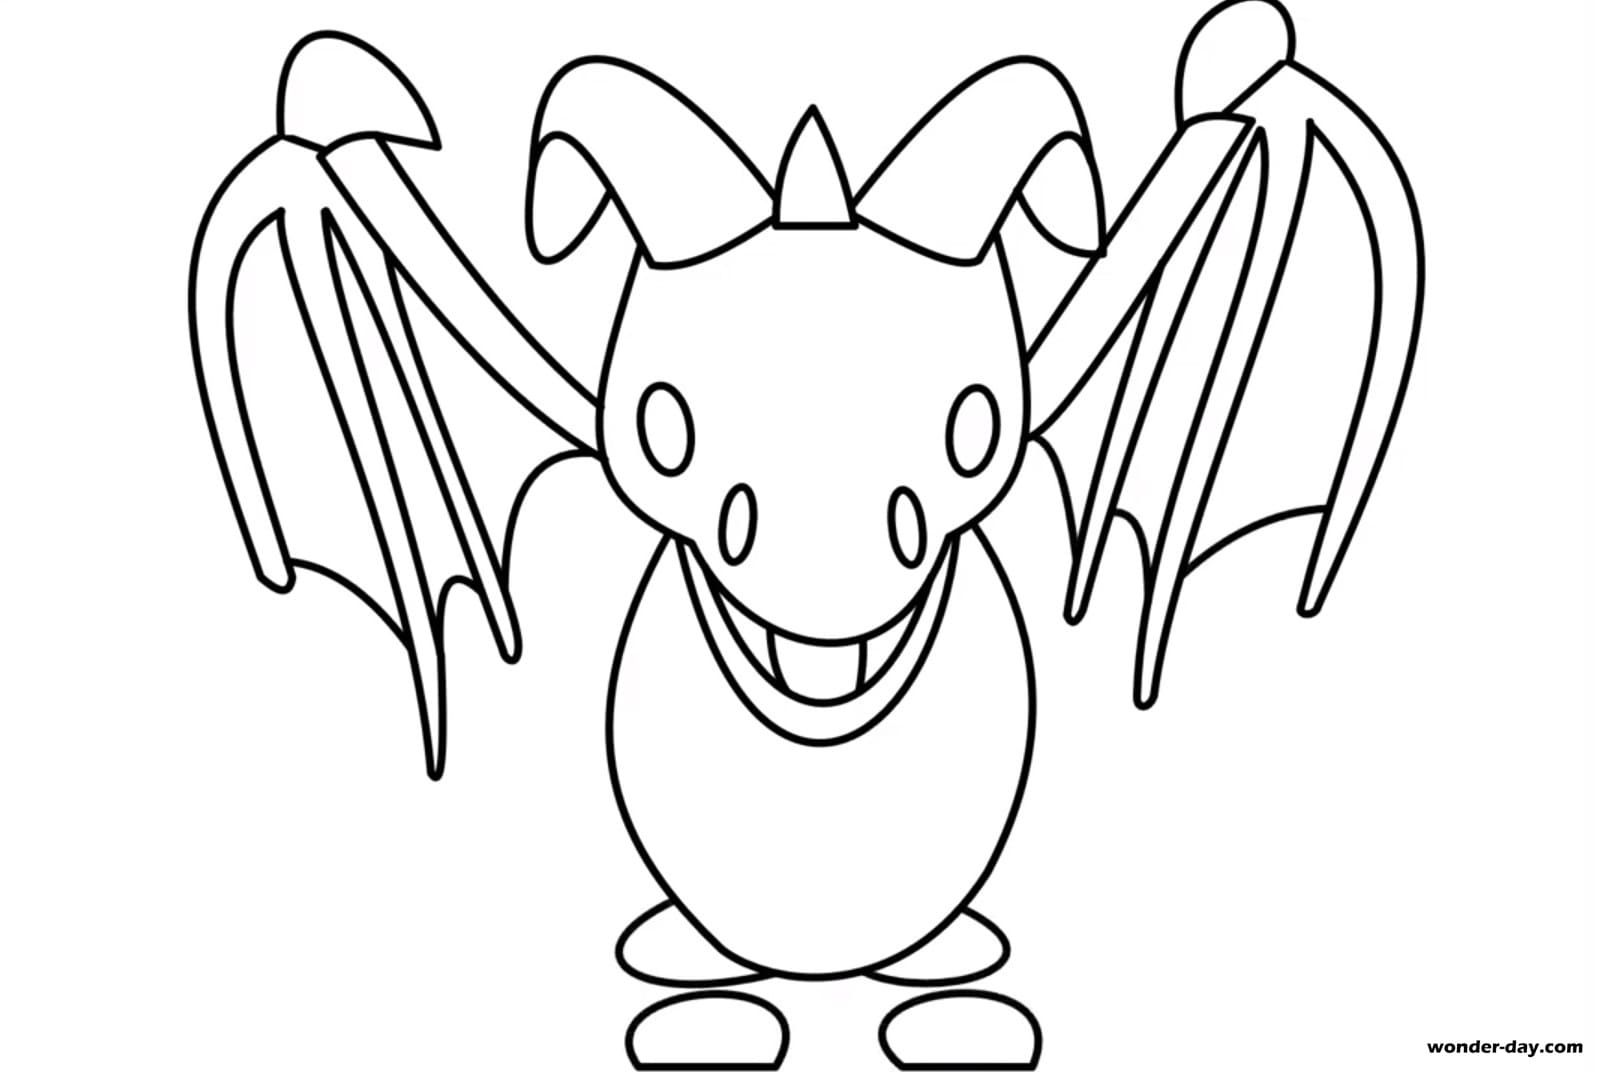 Coloring pages Adopt Me. Print for free | Wonder-day.com | Pets drawing,  Animal coloring pages, Dragon coloring page